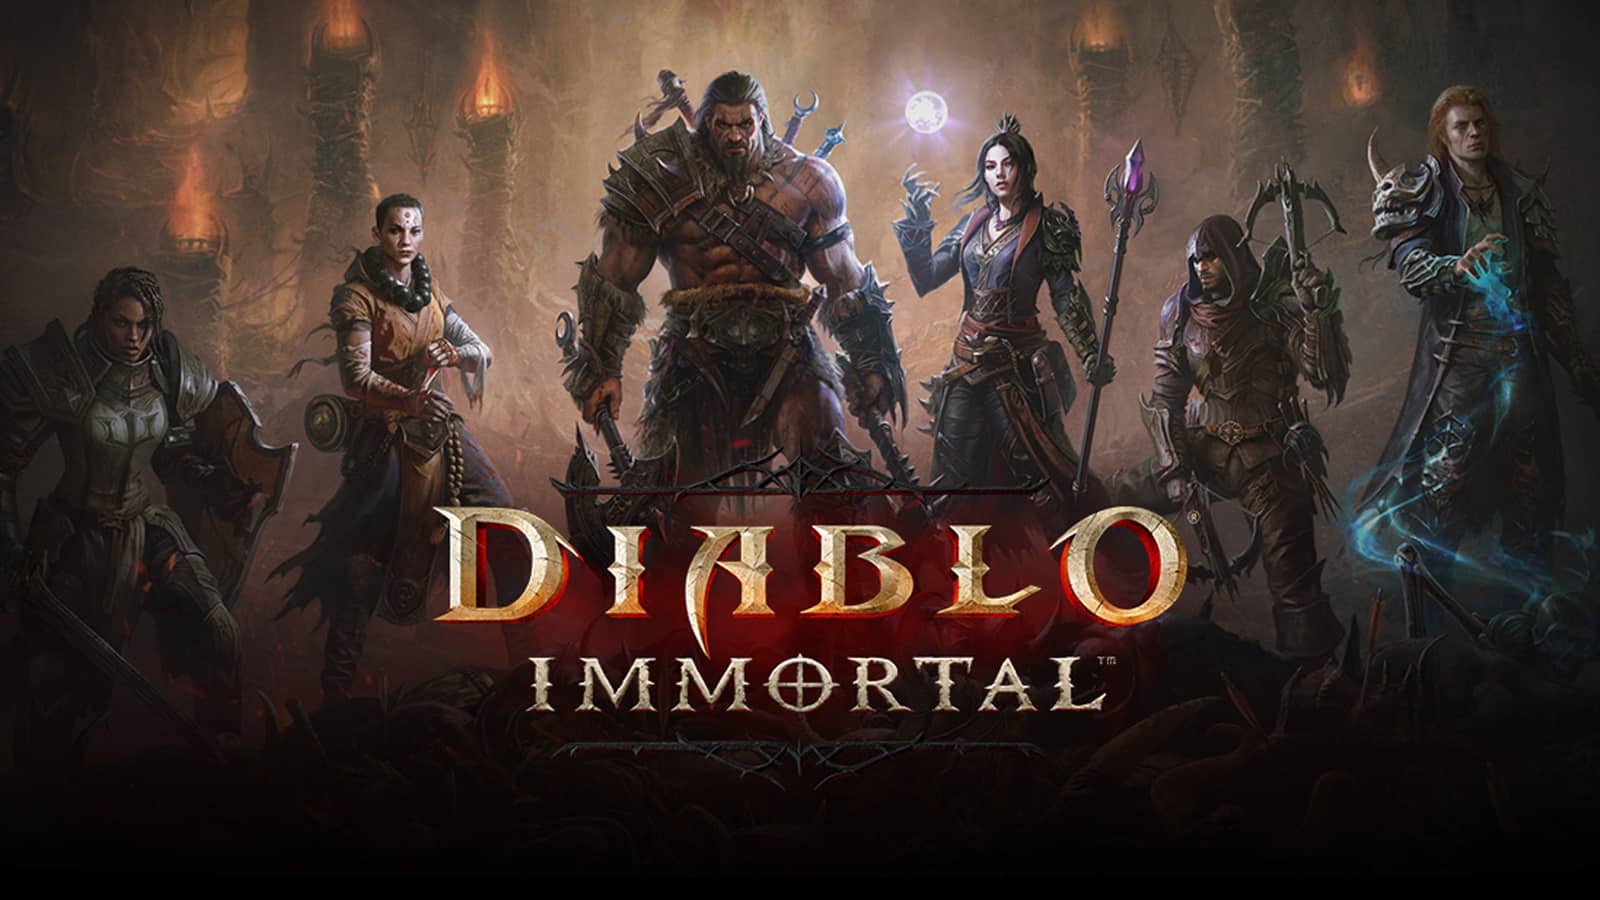 Diablo Immortal will be a free-to-play MMORPG by Blizzard